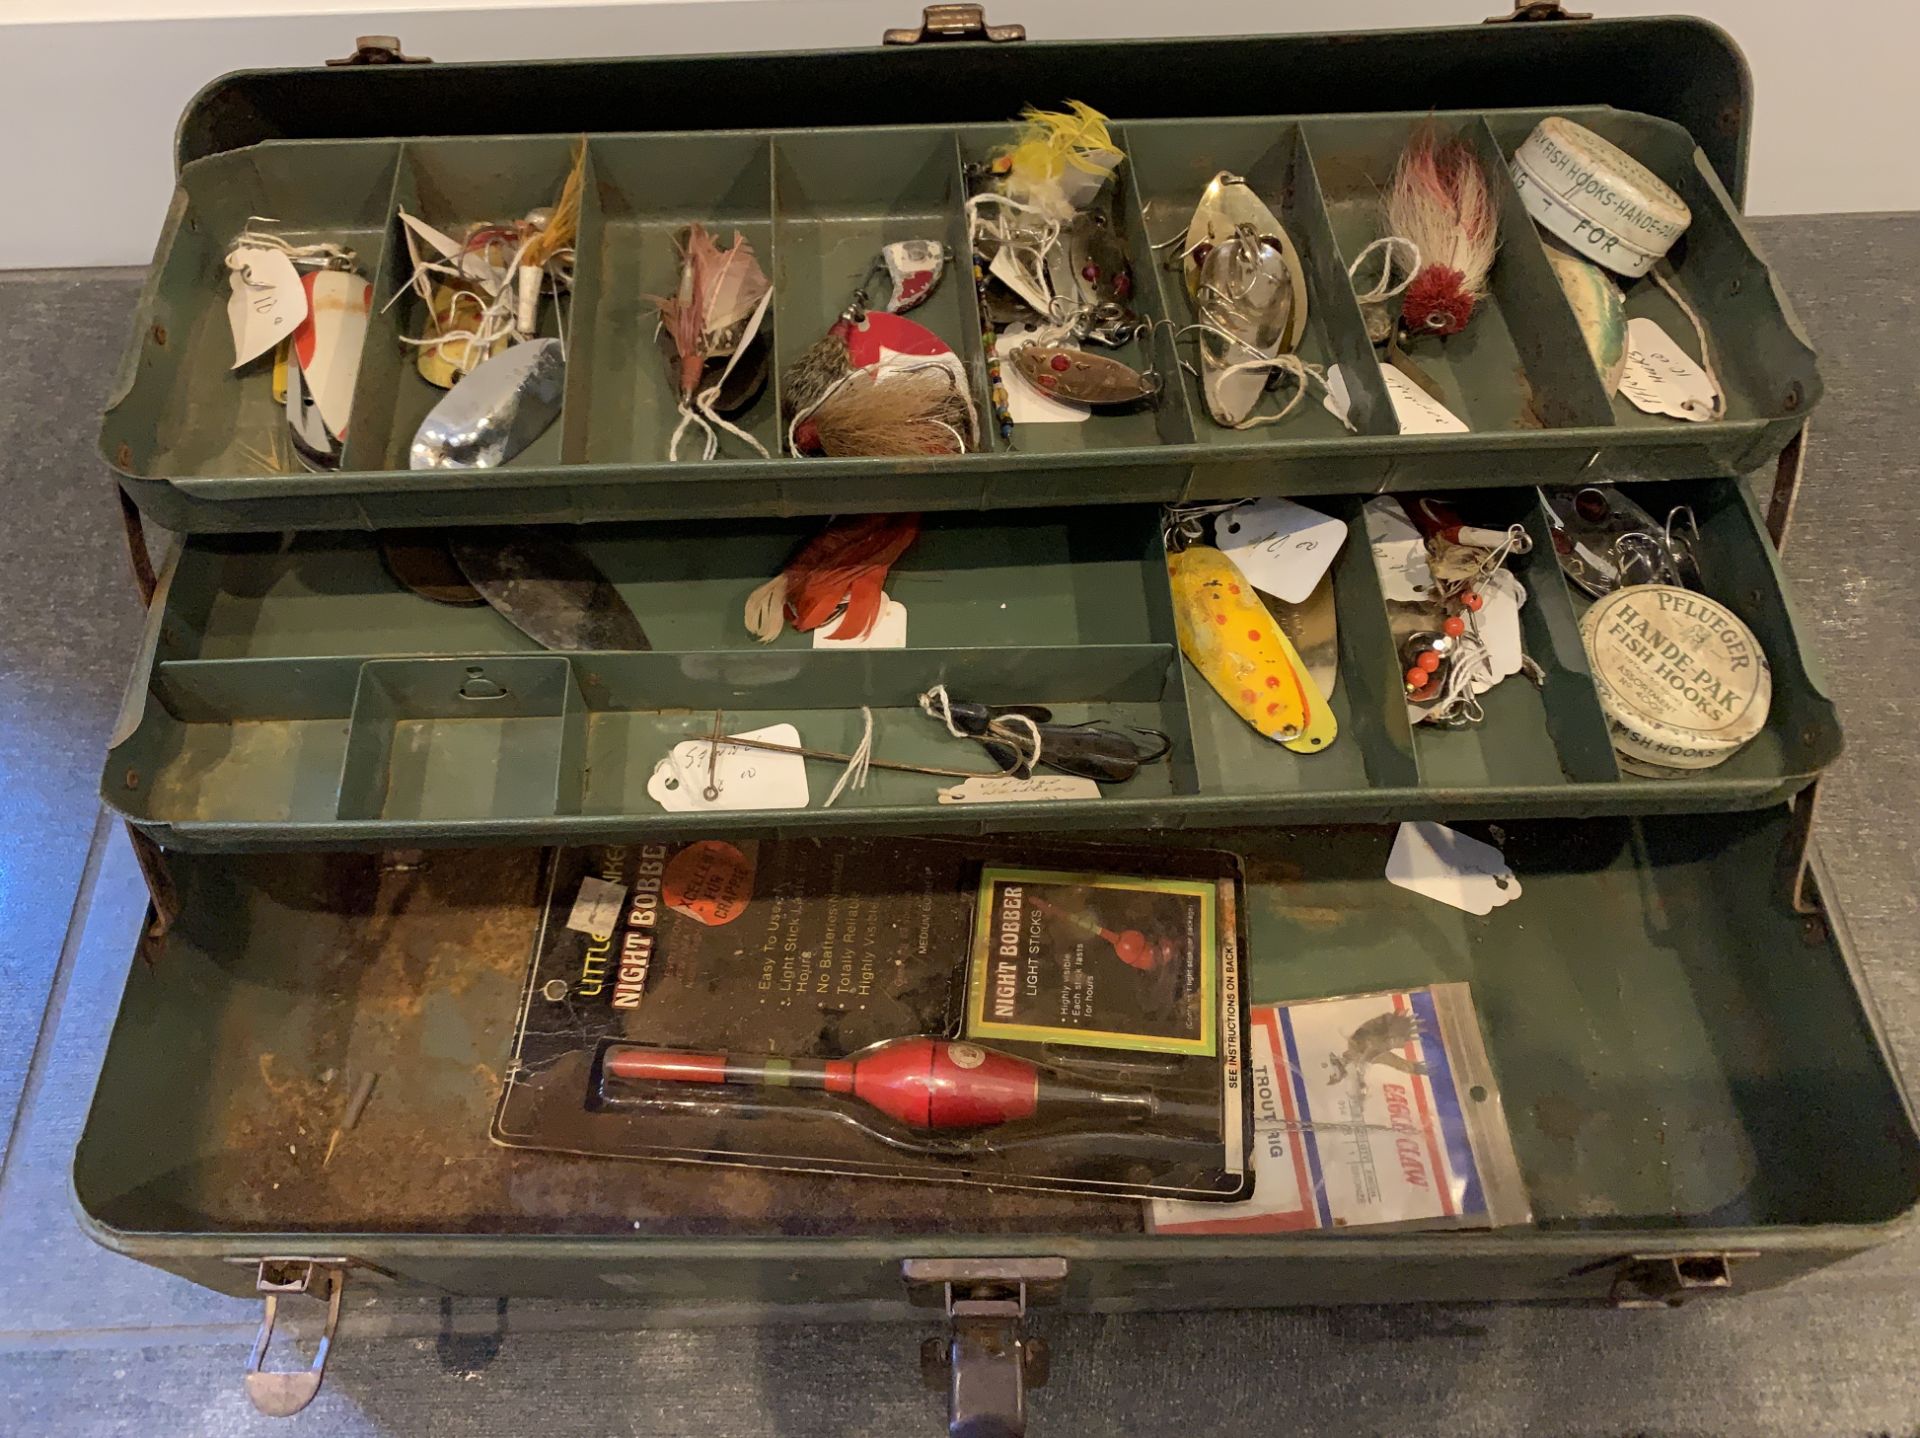 VINTAGE FISHERMAN'S TACKLE BOX WITH FISHING ITEMS INSIDE $350 VALUE LEATHER HANDLE ON CASE - Image 4 of 11